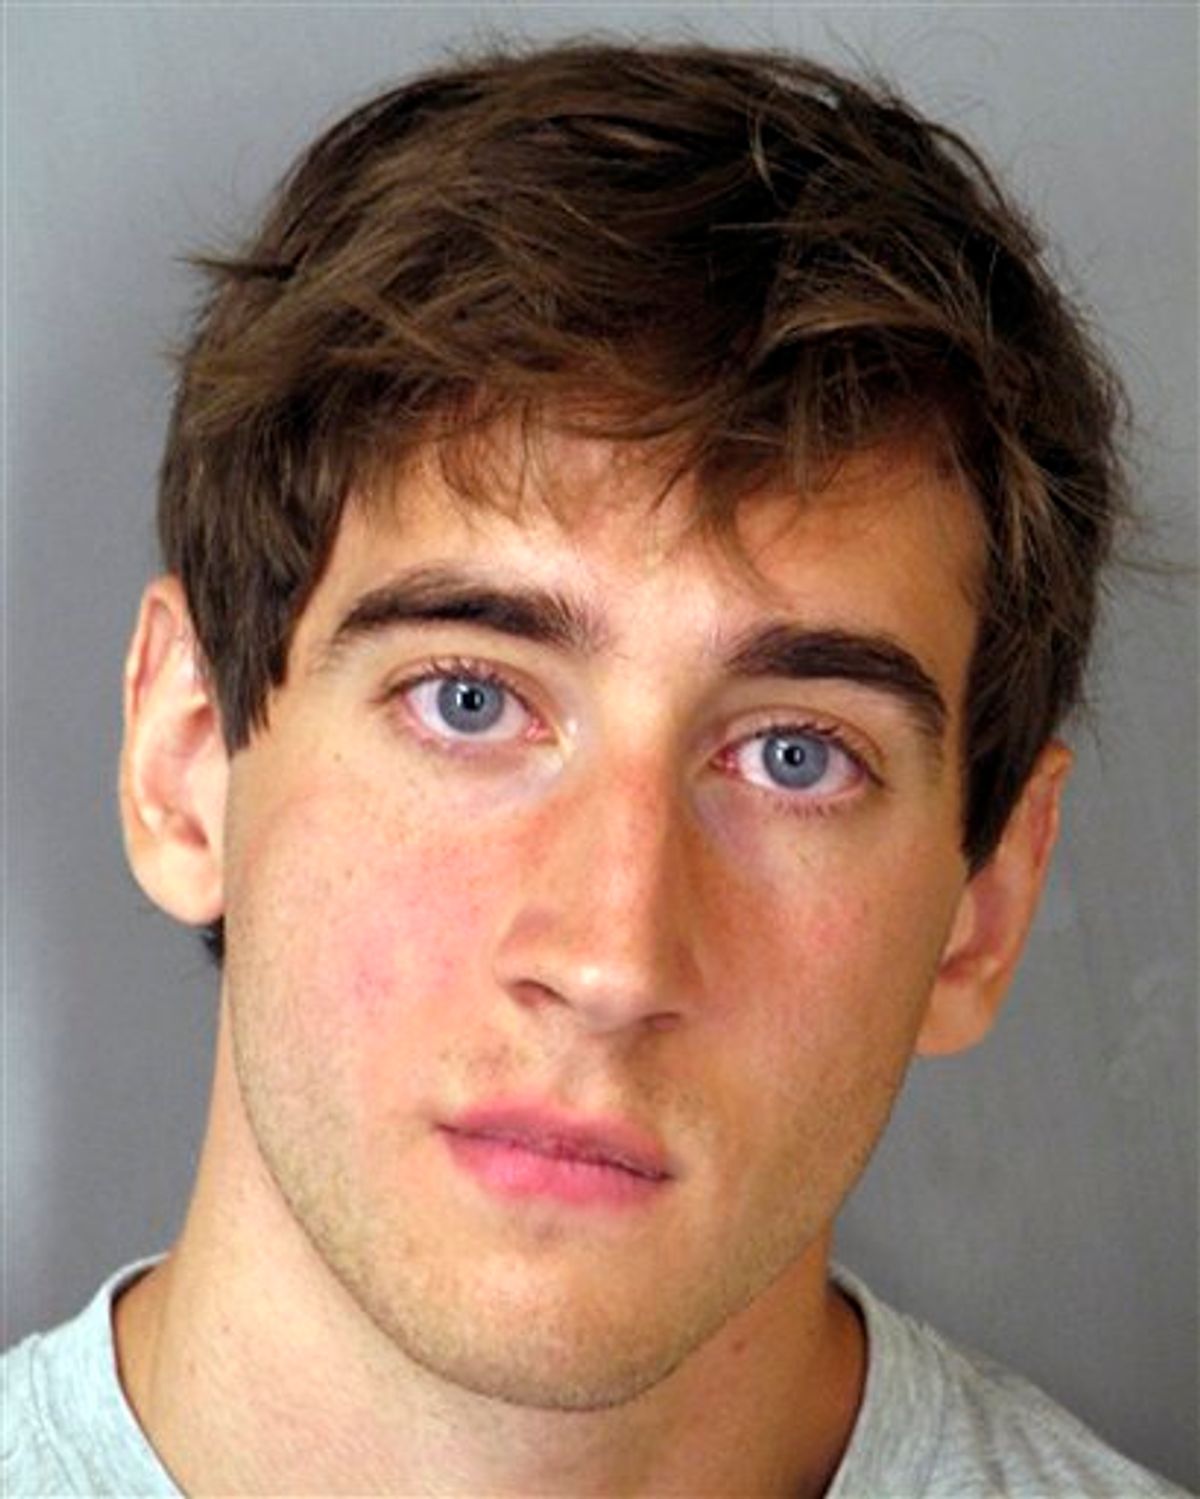 This May 10, 2010 Delaware State Police booking photo released by the Middlesex County, Mass., district attorney's office shows Adam Wheeler, of Deleware, indicted on identity fraud, larceny and falsifying documents from several prestigious schools including Harvard University and Massachusetts Institute of Technology. (AP Photo/Delaware State Police) (AP)